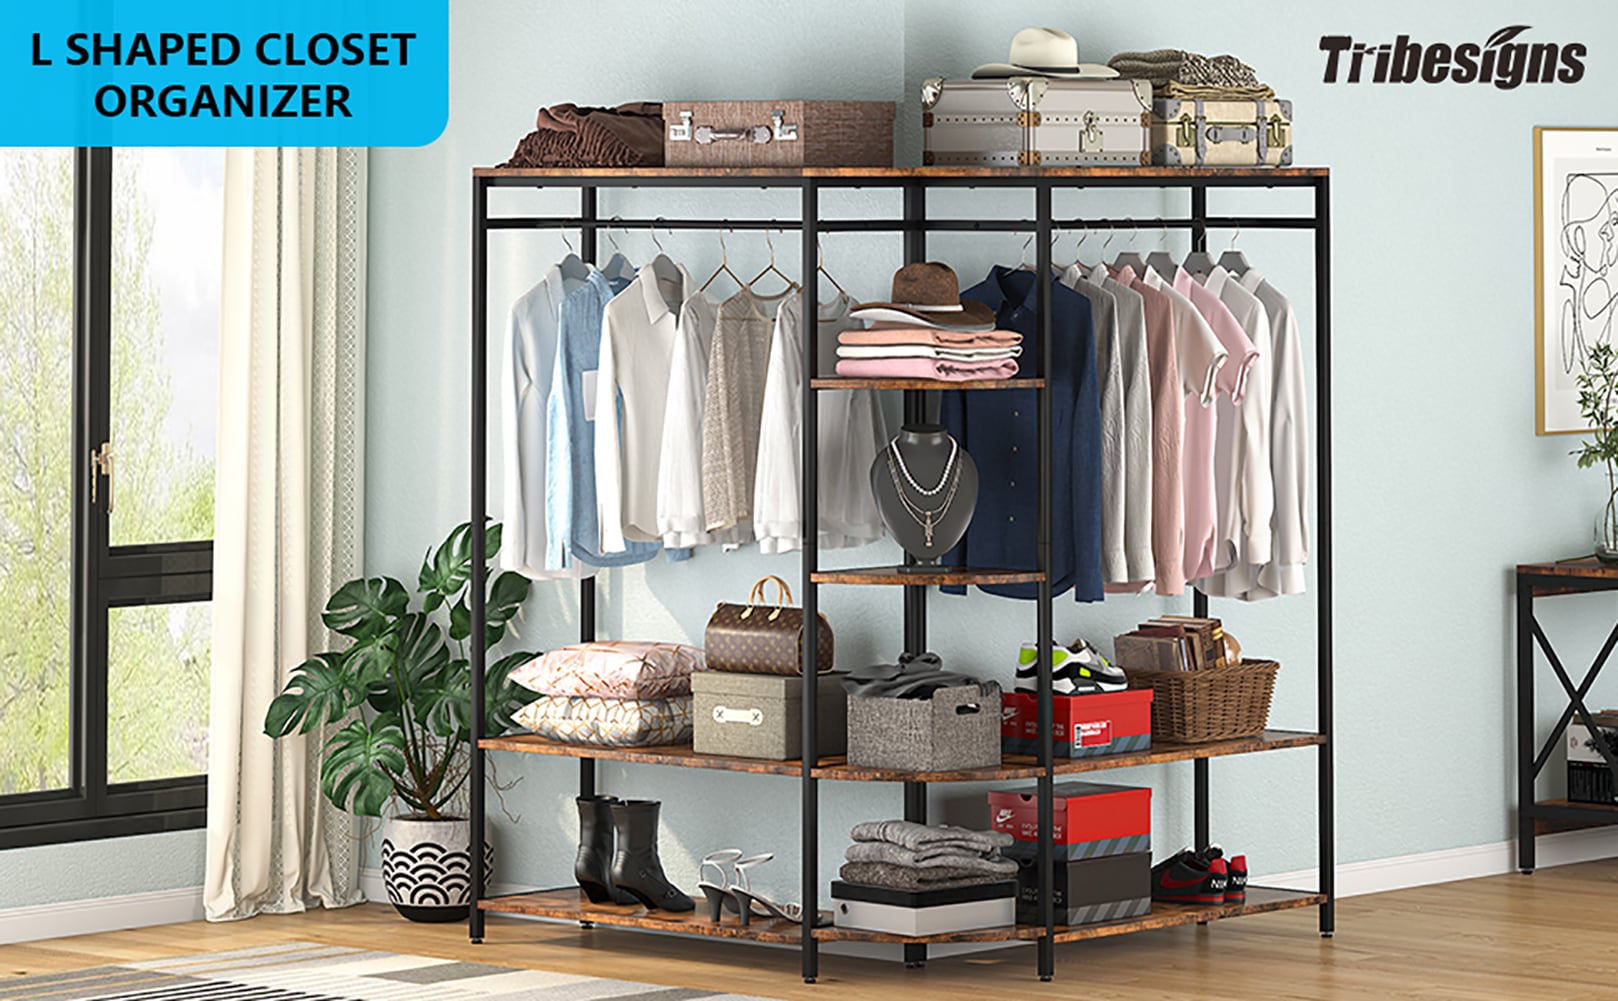 Apparel Racks For Containers: Clothes Storage: Great Lakes Kwik Space